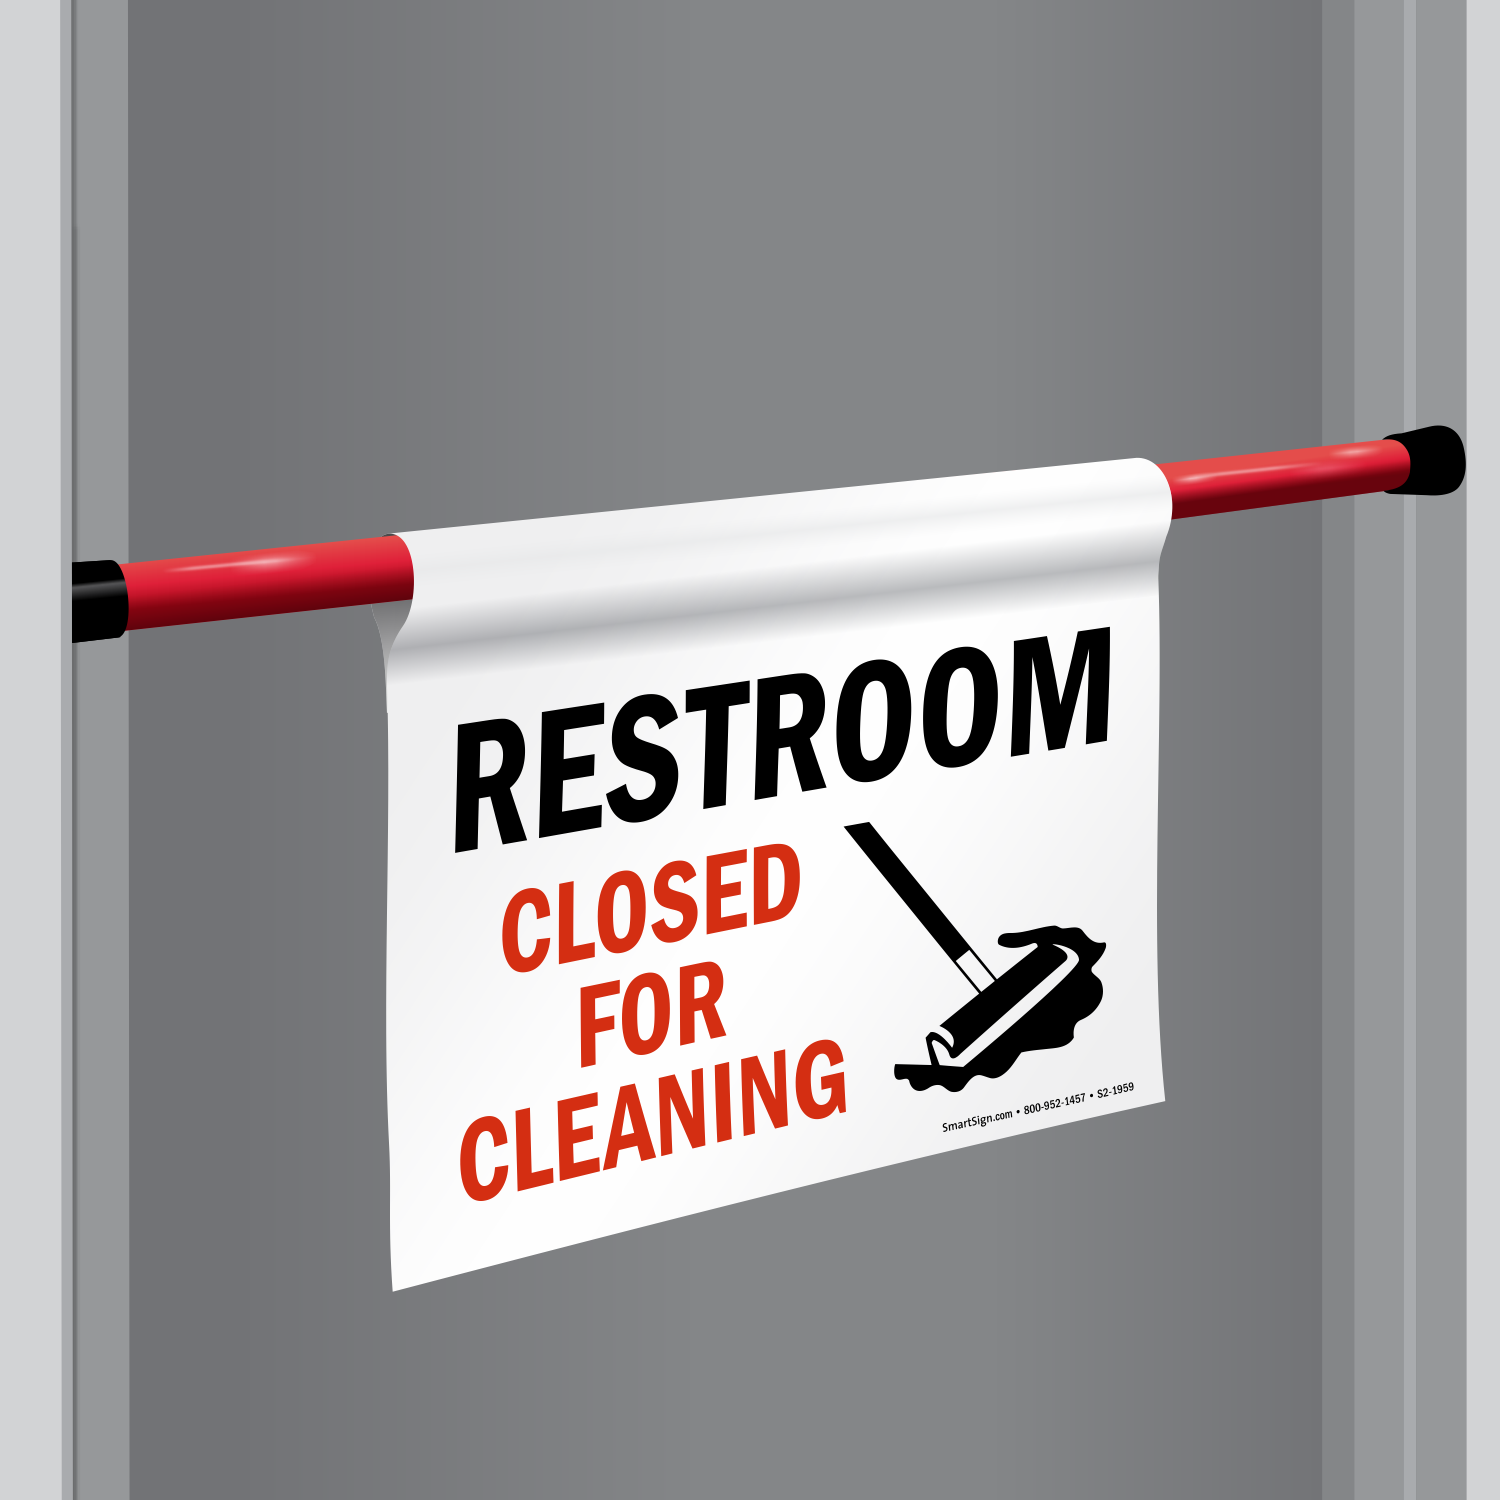 Restroom Closed For Maintenance Sign